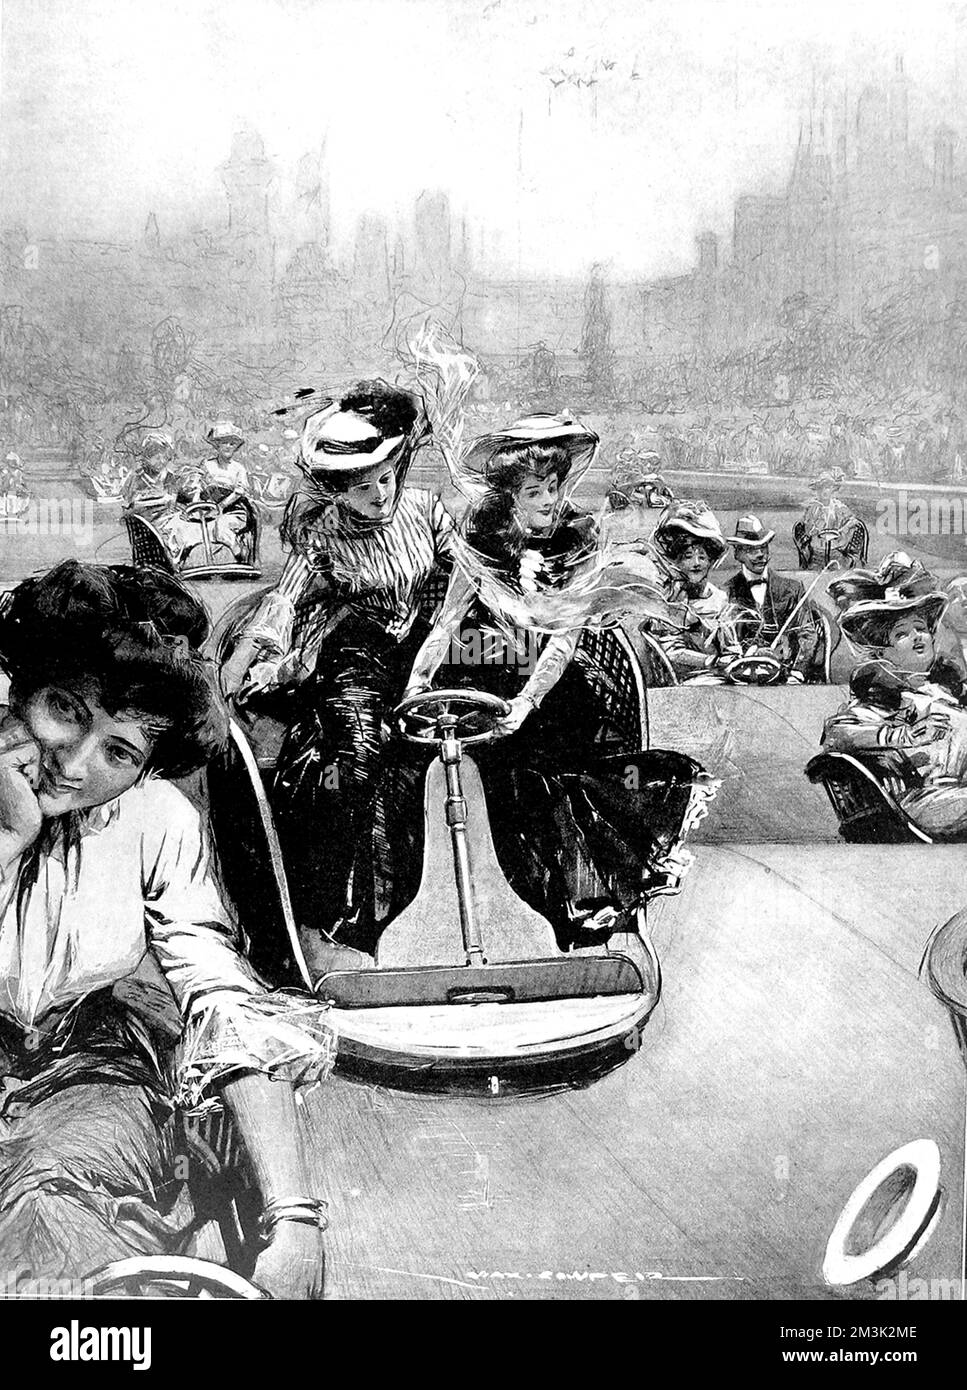 The 'Witching Waves' ride at the White City amusement ground, London. This ride gave the impression of travelling over a series of waves whilst travelling in a small 'car' similar to a 'dodgem'.     Date: 1909 Stock Photo